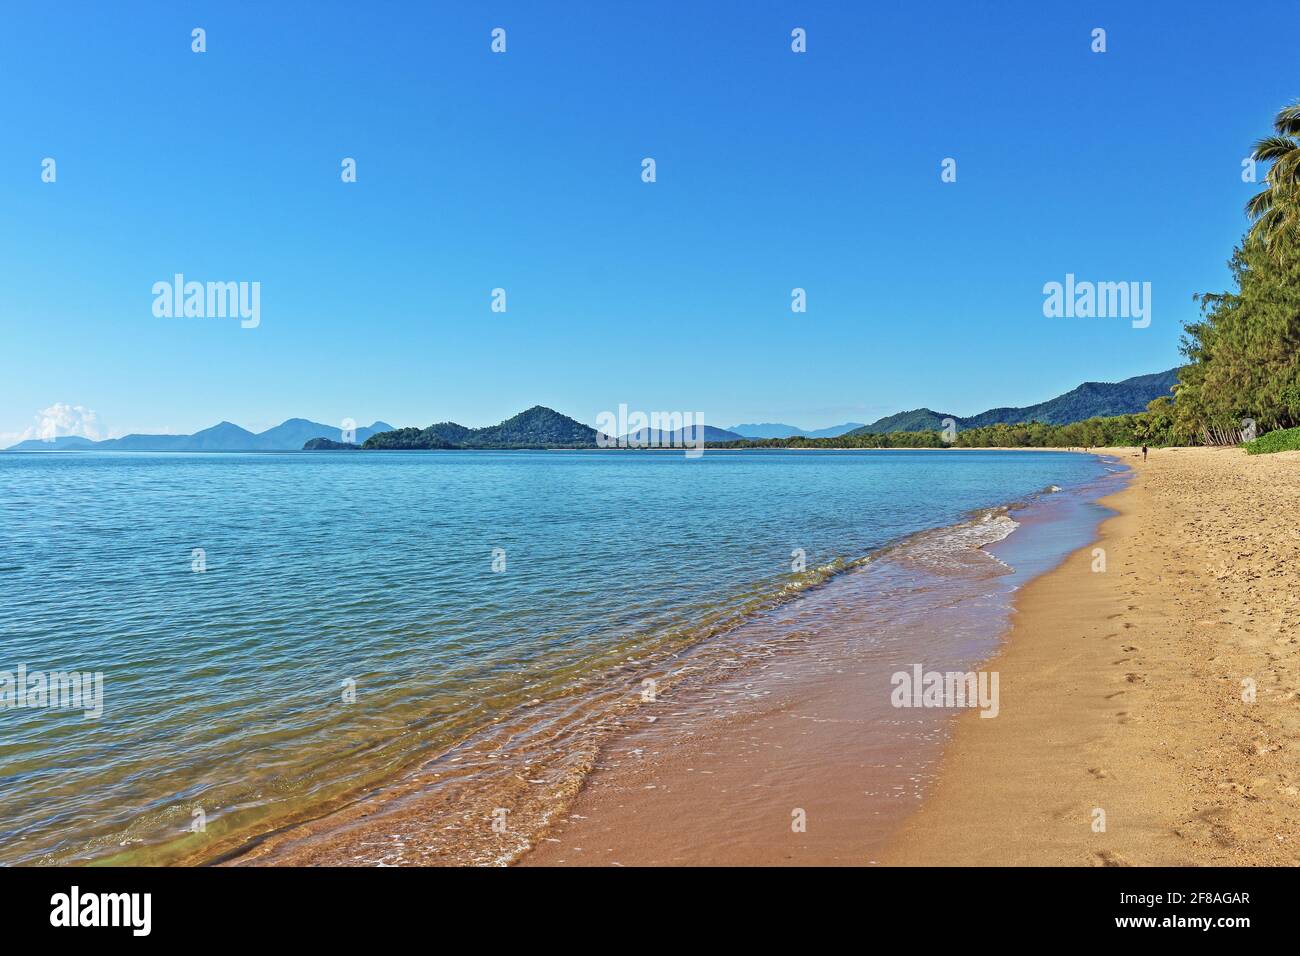 Clear blue skies and calm seas featured this morning looking south from the sand out front of Vivo at Palm Cove, Cairns Far North Queensland Australia Stock Photo